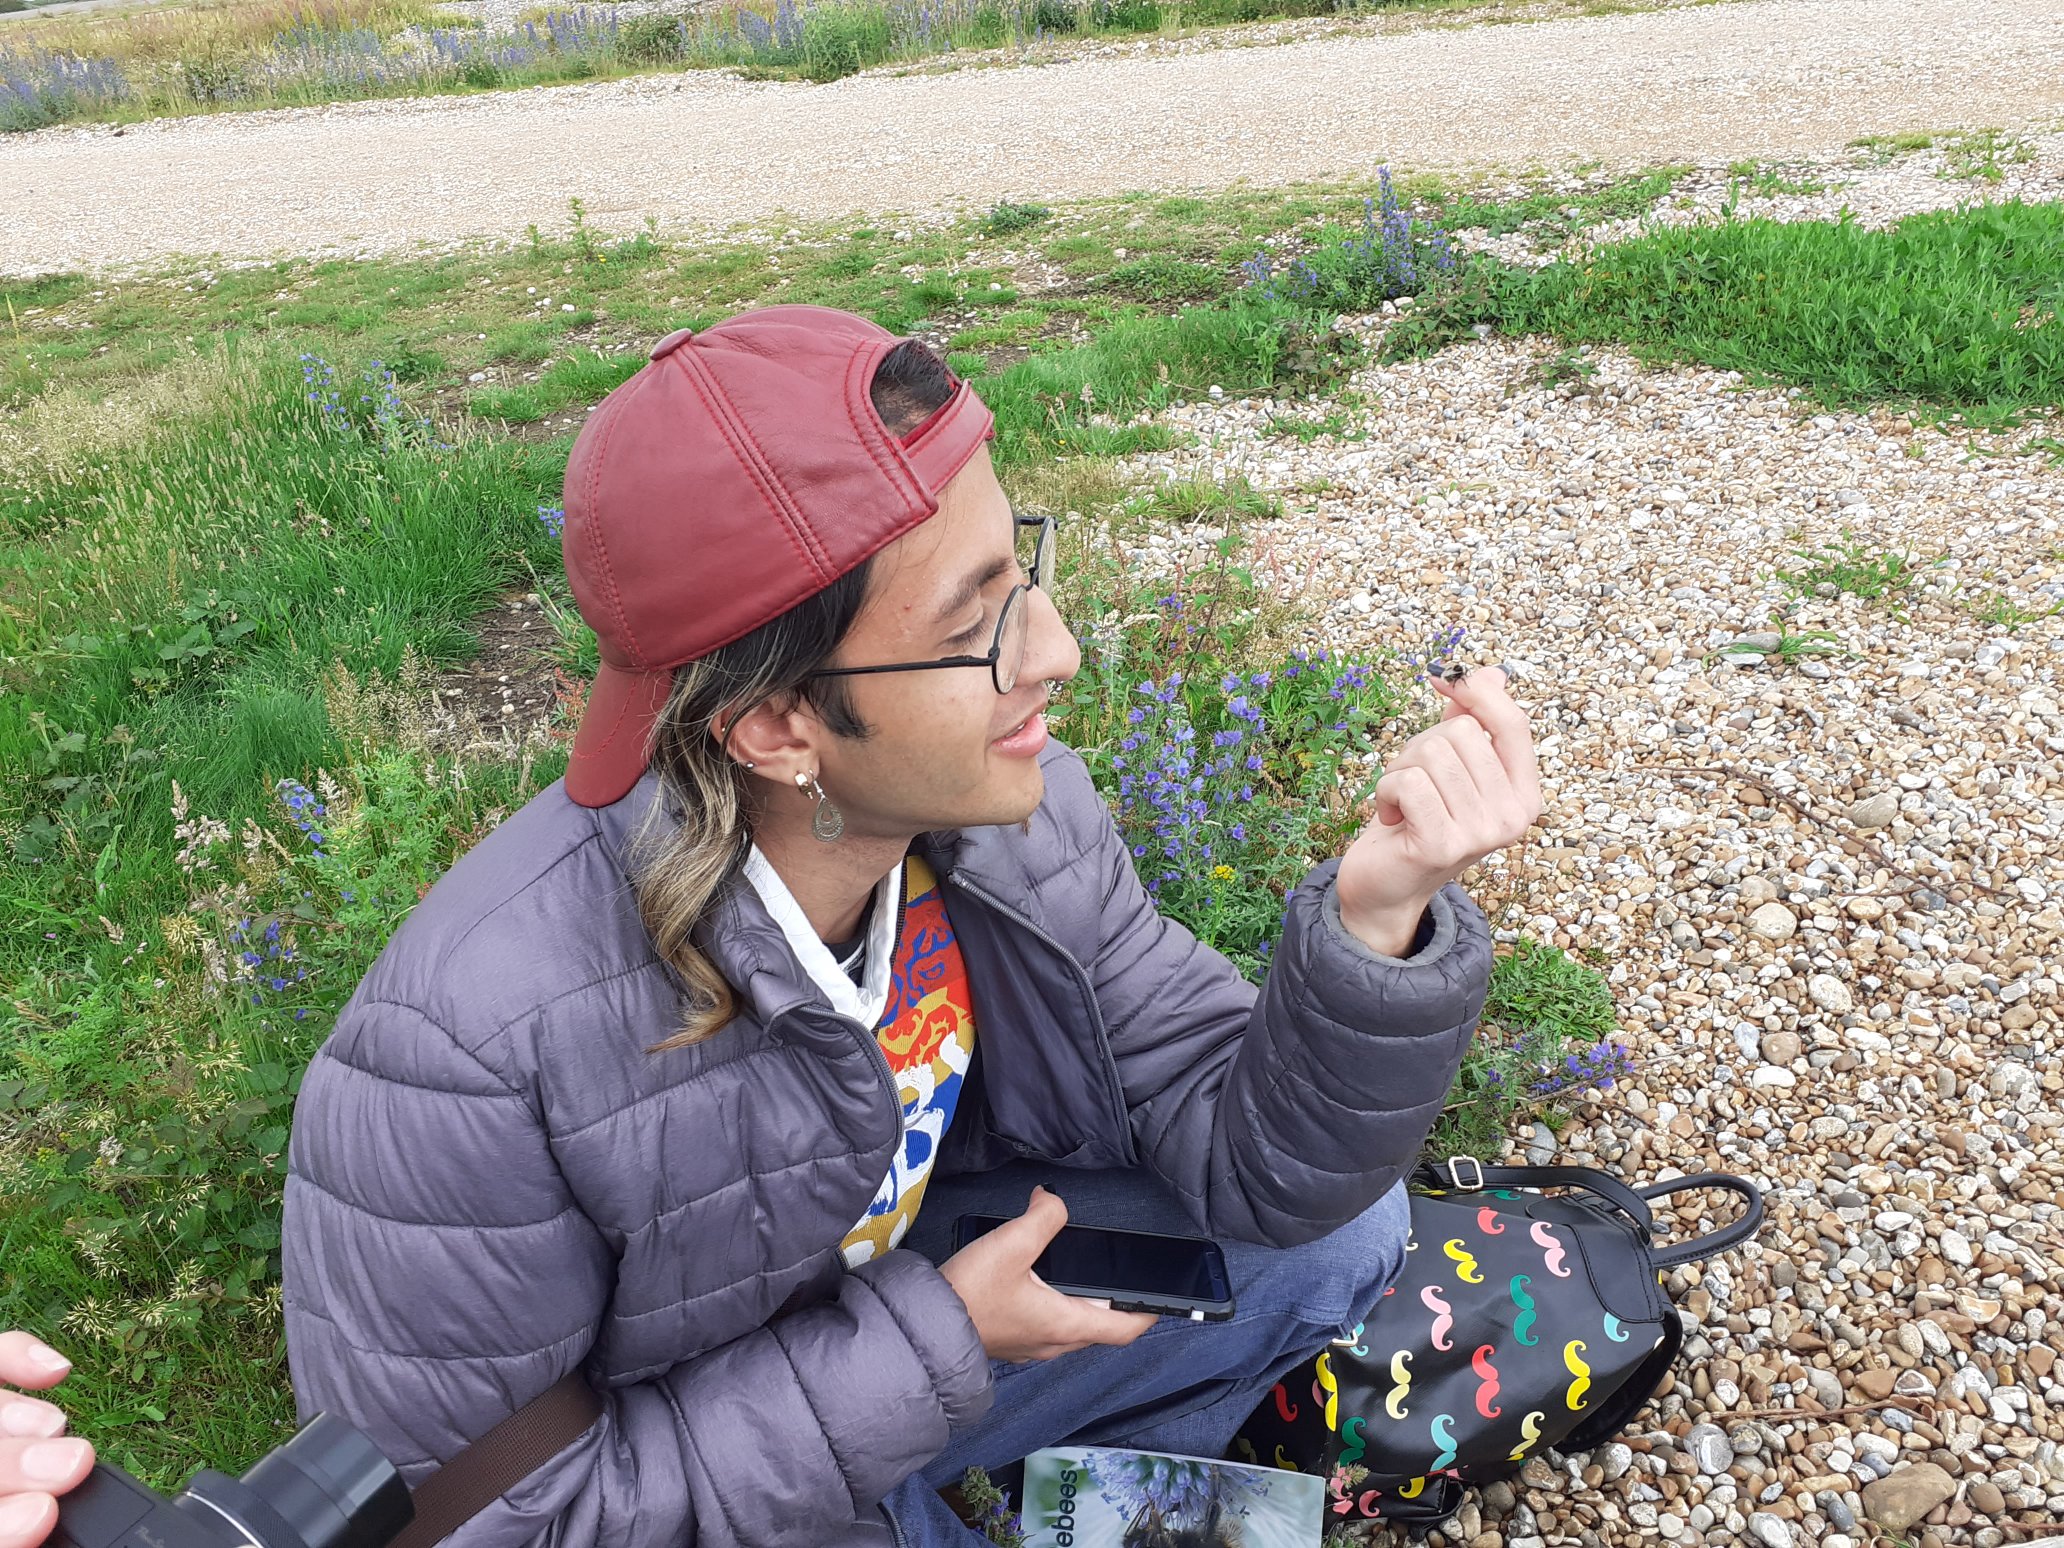 This photo was taken at RSPB Dungeness, when Dawood met up with someone from the Bumblebee Conservation Trust. Together they explored the bees living in the reserve. Notice the one on Dawood's finger!